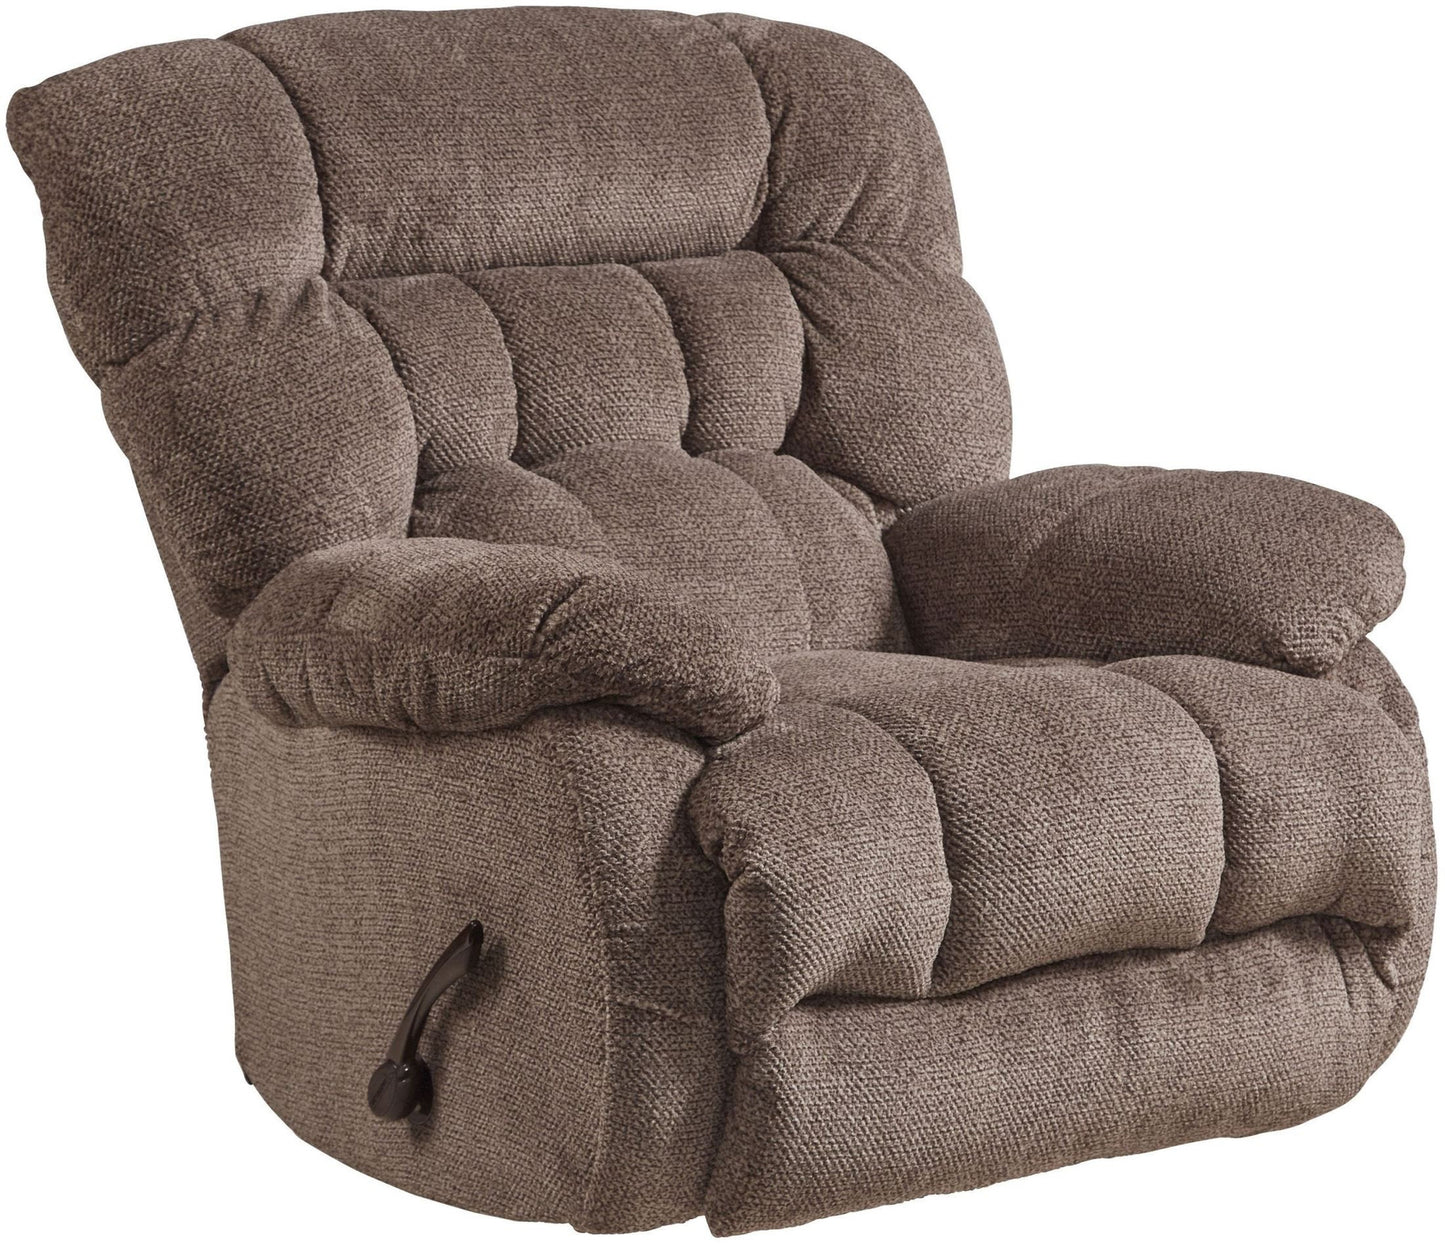 Daly Chateau Chaise Rocker Recliner